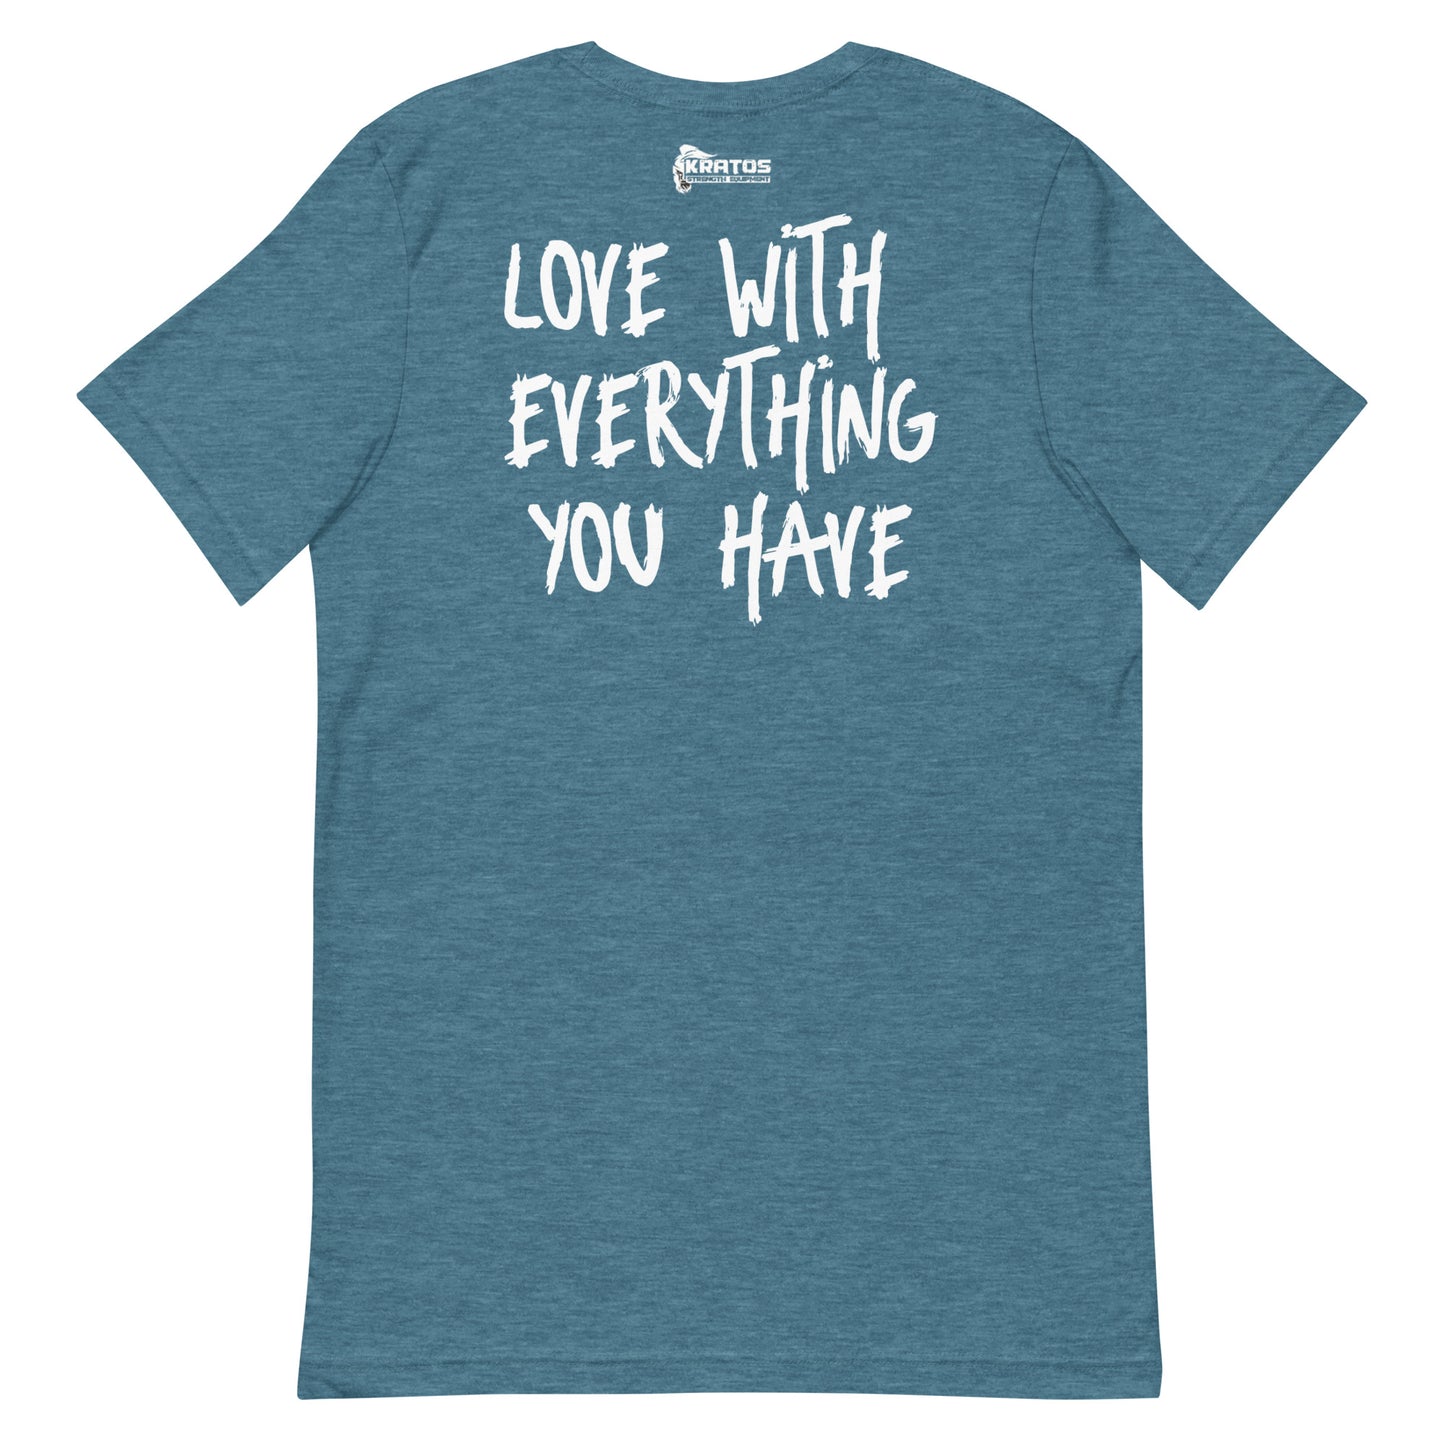 LOVE WITH EVERYTHING YOU HAVE Unisex t-shirt